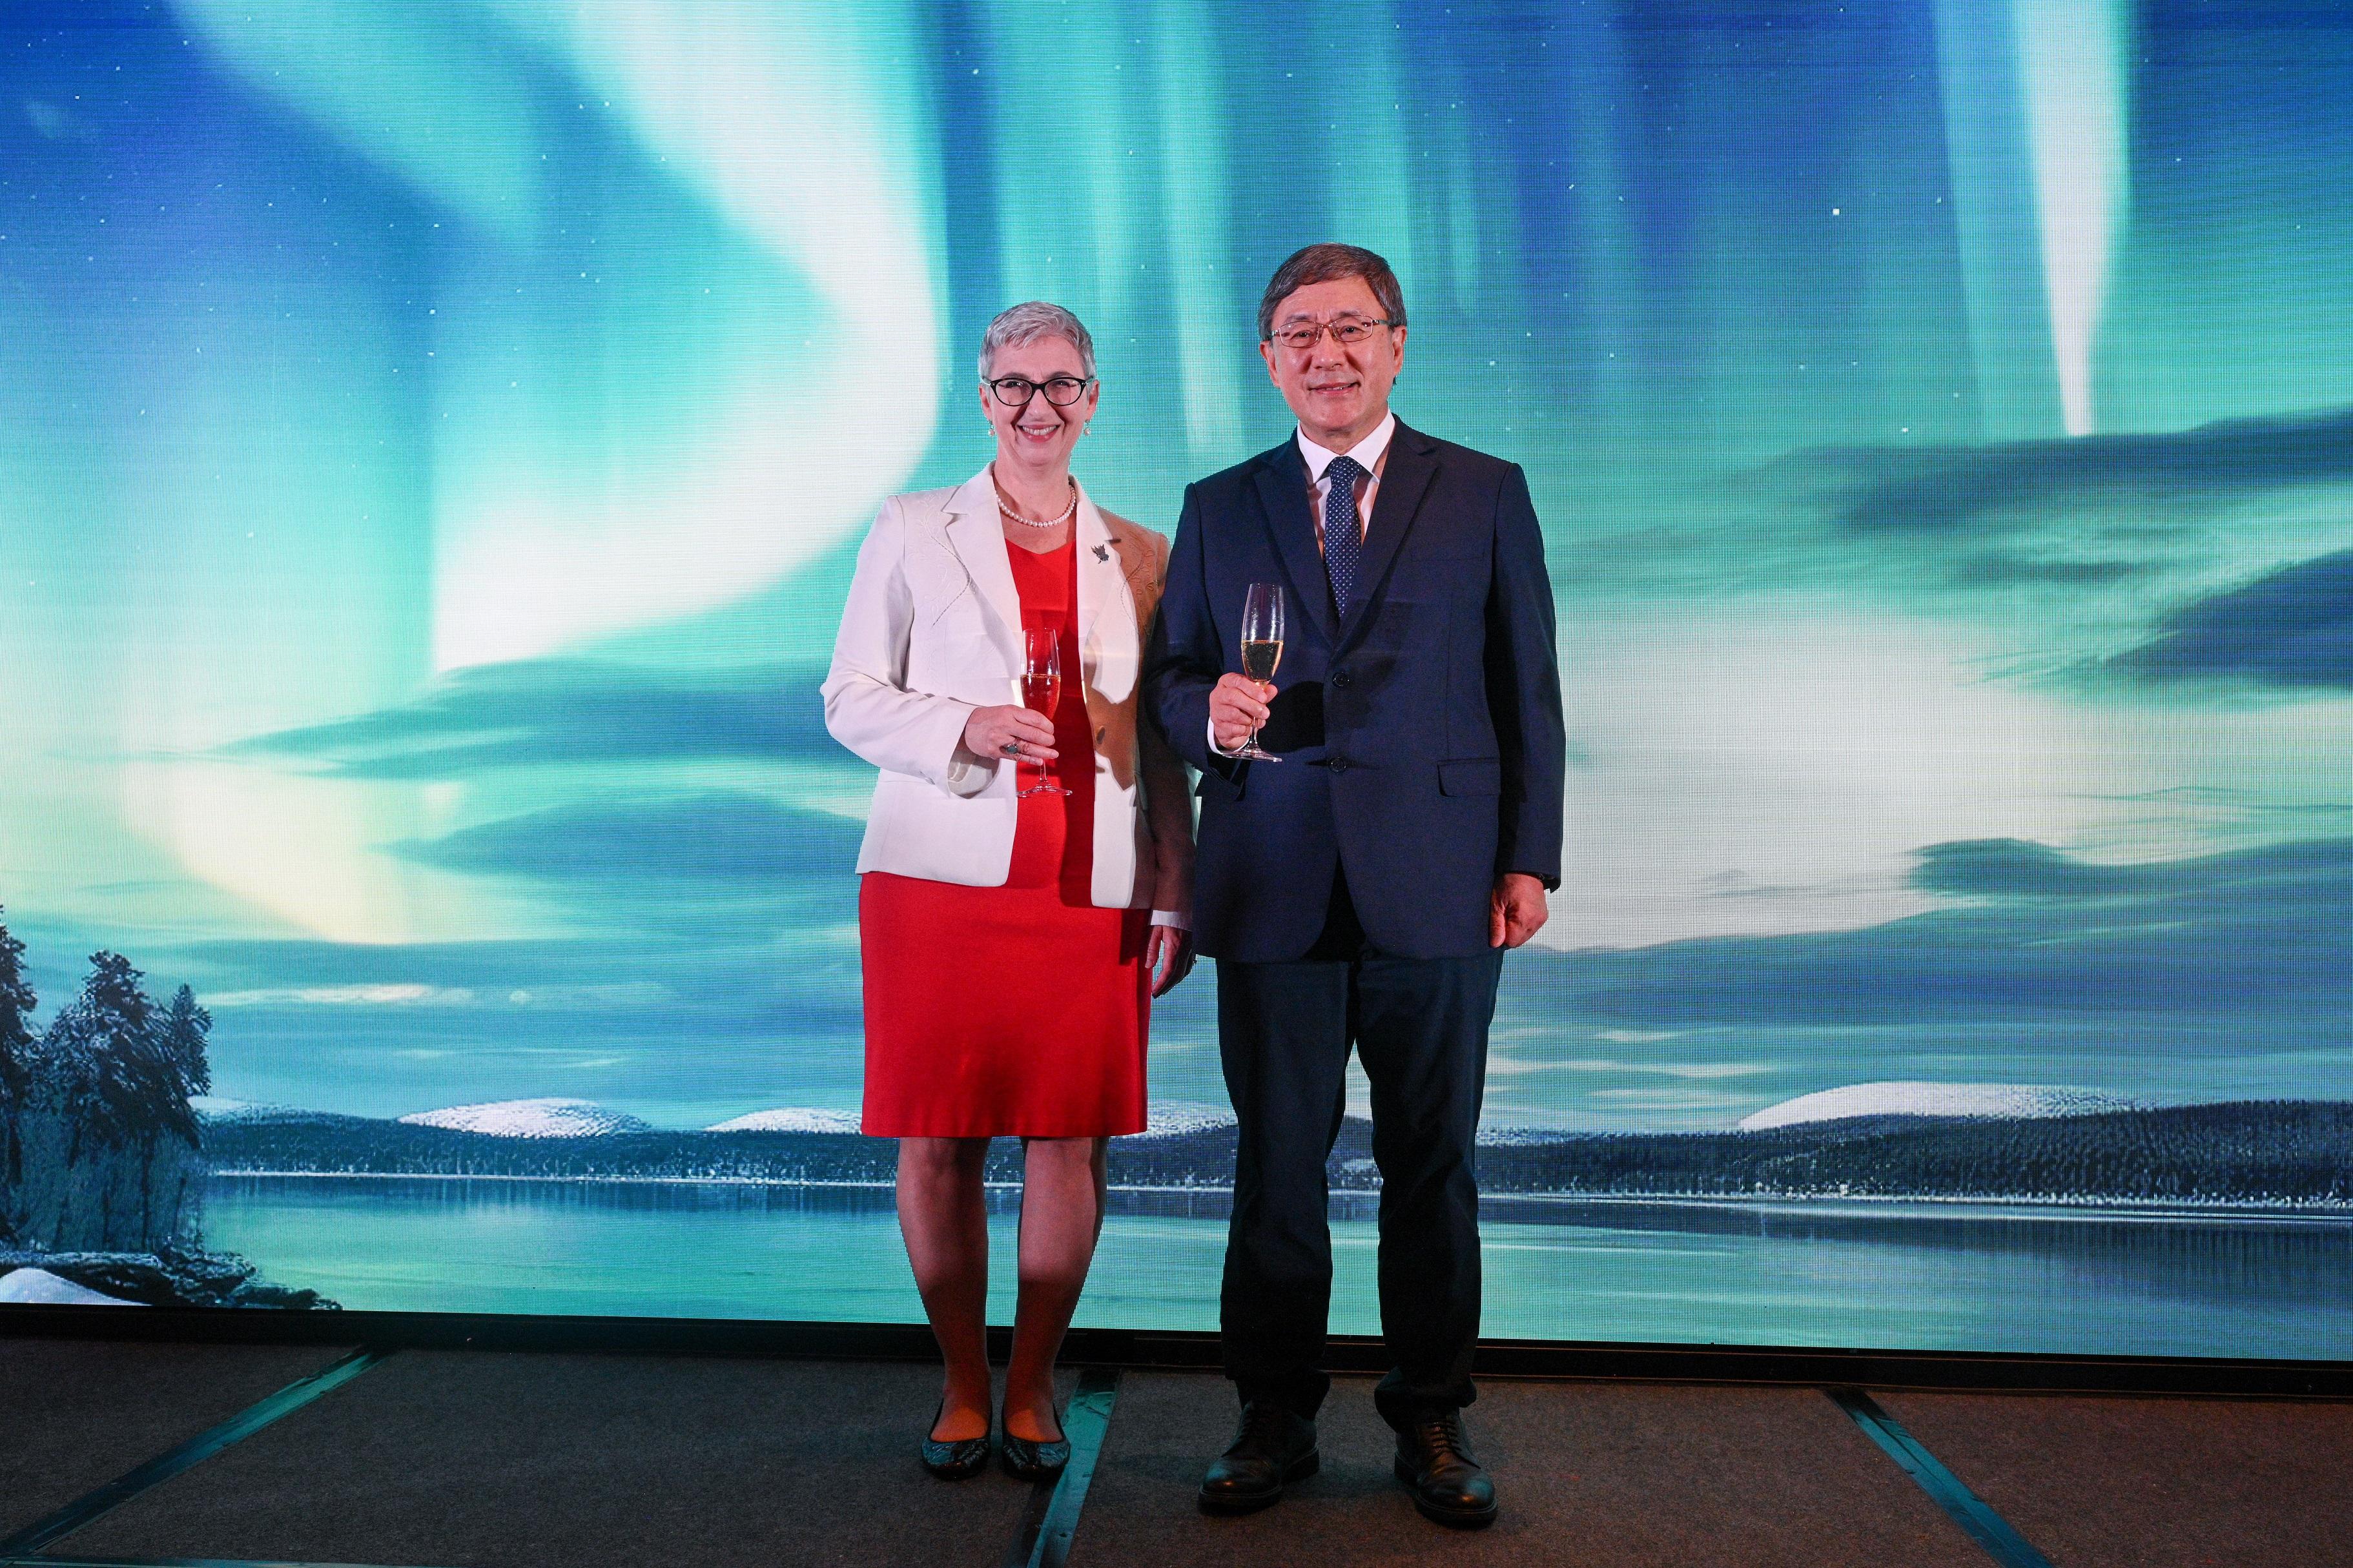 The Deputy Chief Secretary for Administration, Mr Cheuk Wing-hing (right), and the Consul General of Canada in Hong Kong and Macao, Ms Rachael Bedlington (left), pose for a photo at the Canada Day Reception today (May 24).